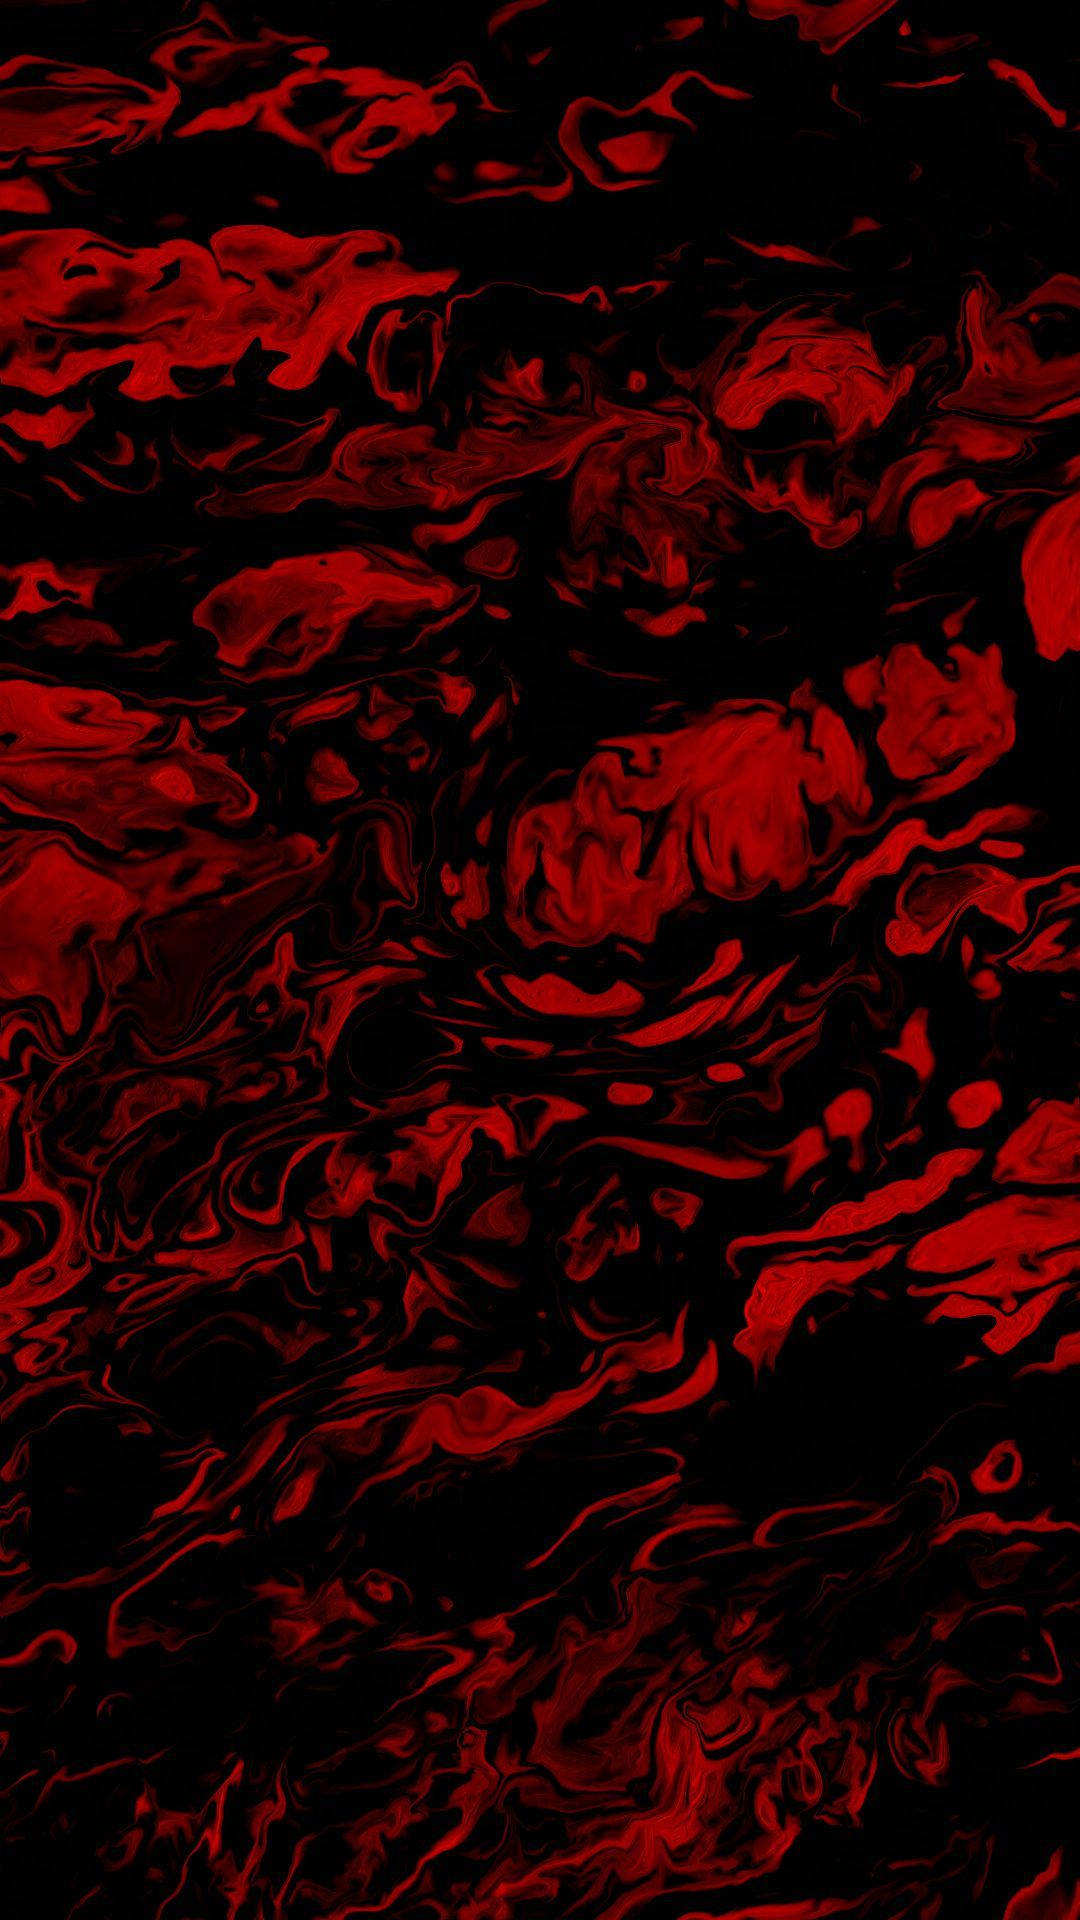 A beautifully contrasting cool red and black landscape Wallpaper